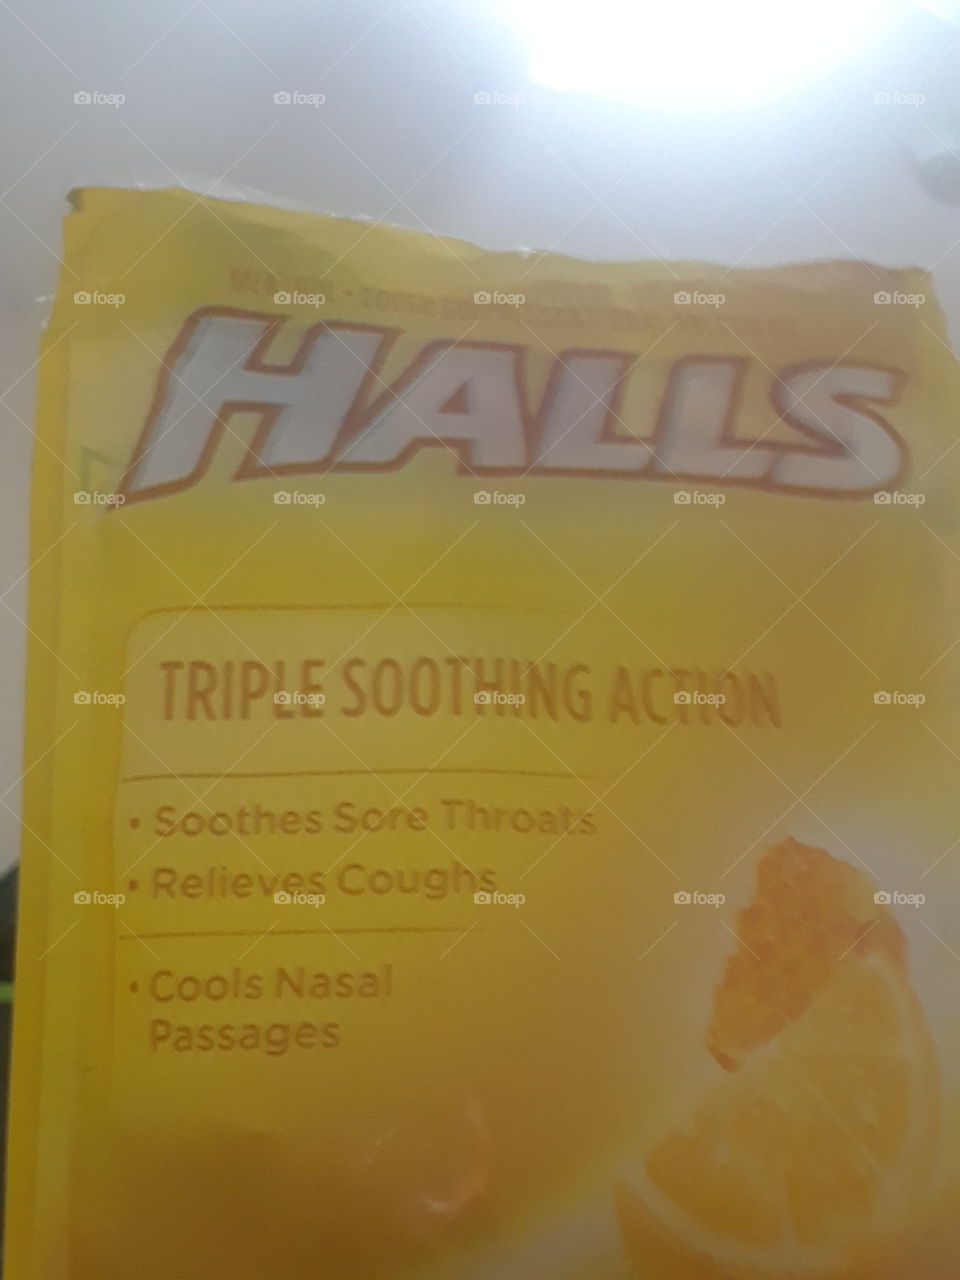 Halls.Cure for cough.Yummy and delicious Lemon flavor.Great way to satisfy your throat.Melts in your mouth and not in your hands.Love for the halls.U can feel the power when chewing this item.